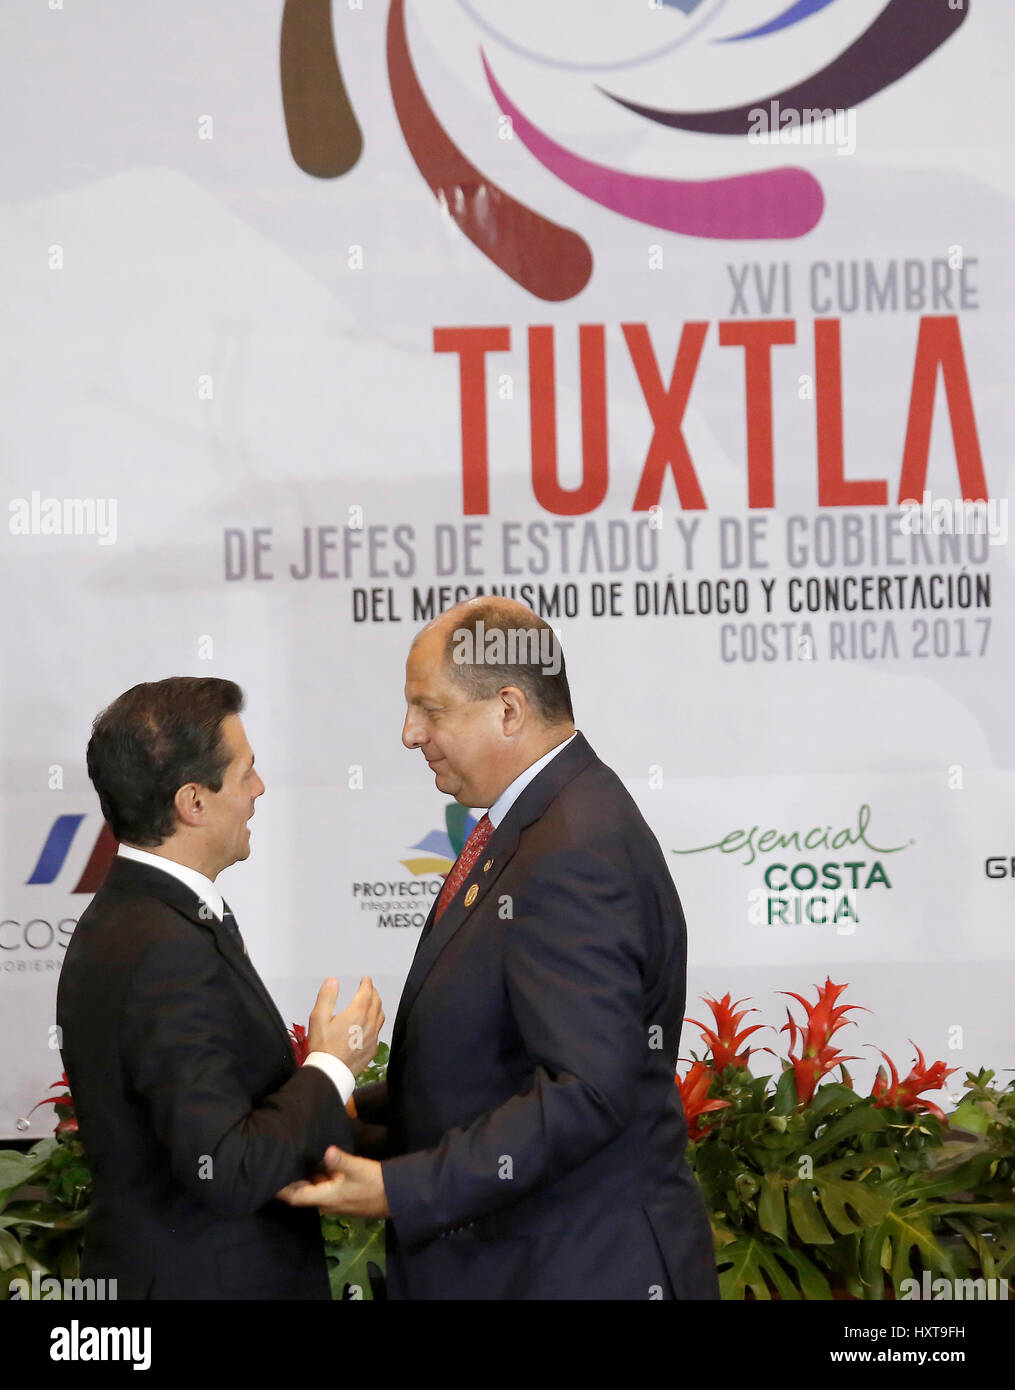 San Jose, Costa Rica. 29th Mar, 2017. Mexico's President Enrique Pena Nieto (L) talks with his Costa Rican counterpart Luis Guillermo Solis at the 16th Tuxtla Summit of Central American and Latin American leaders, in San Jose, Costa Rica, March 29, 2017. Credit: Kent Gilbert/Xinhua/Alamy Live News Stock Photo